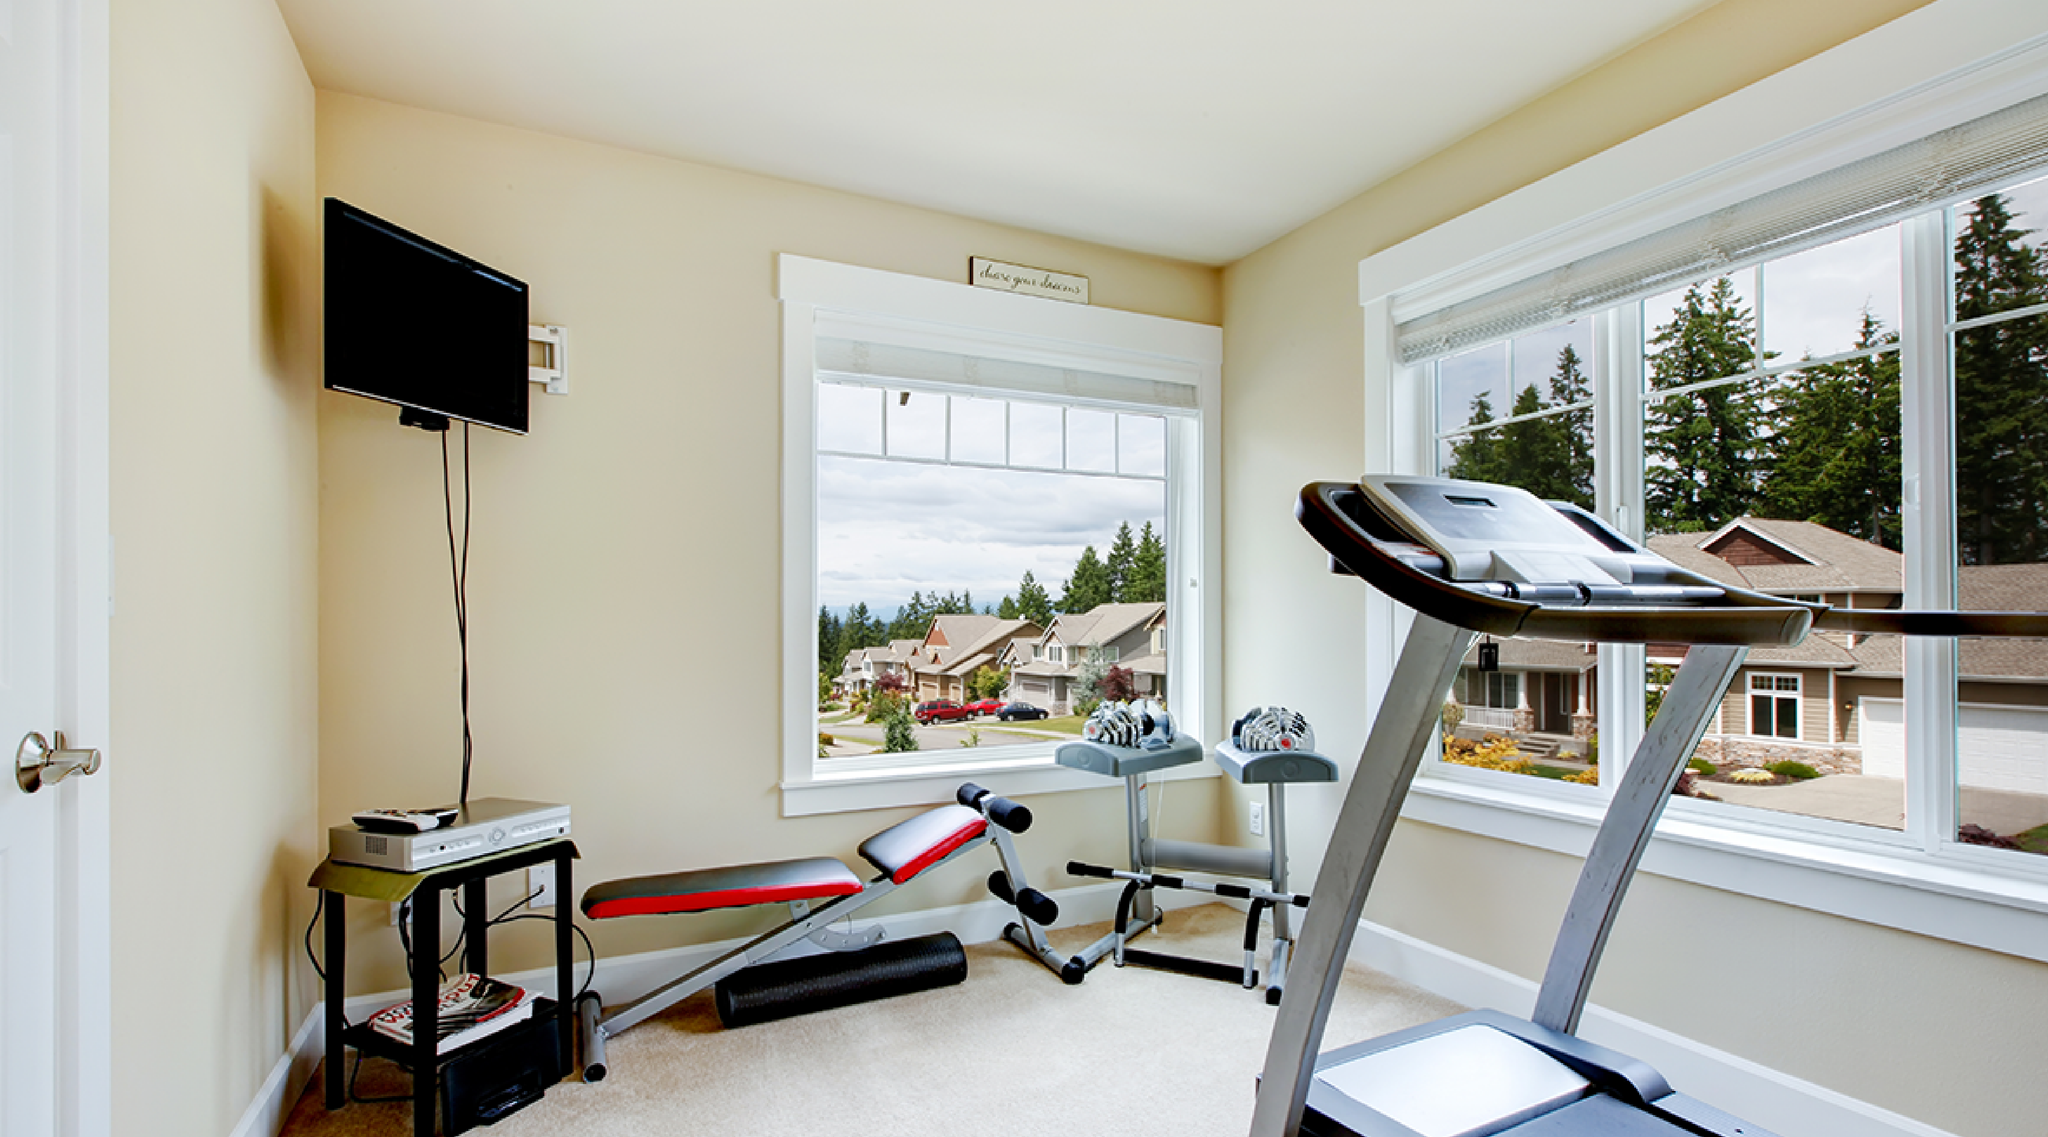 How to Make the Most of Your Home Gym Space - Flaman Fitness